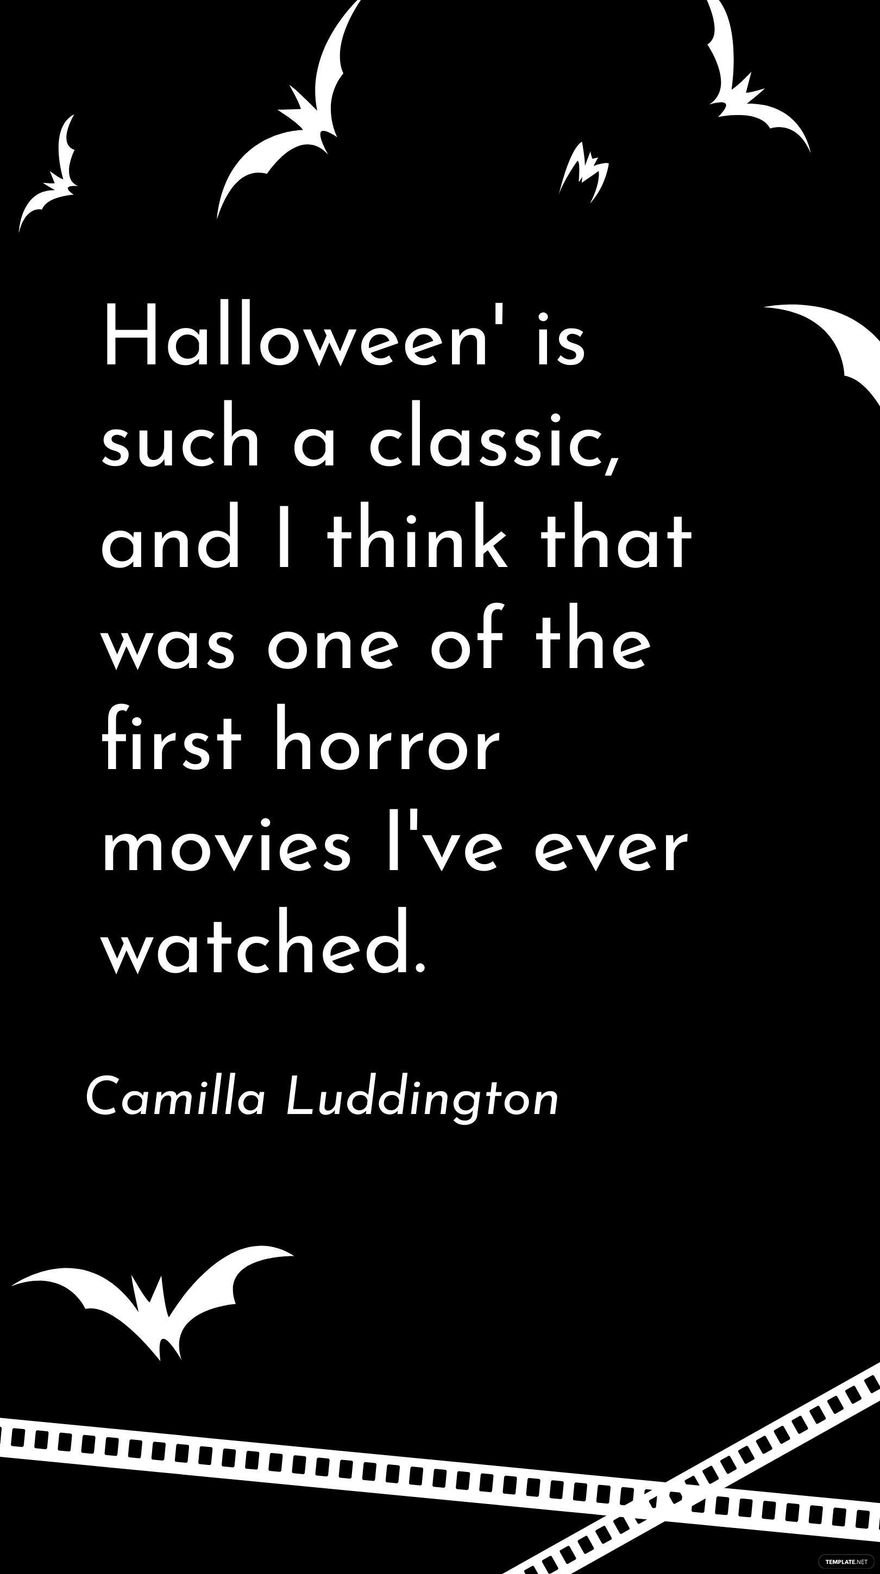 Camilla Luddington - Halloween' is such a classic, and I think that was one of the first horror movies I've ever watched.